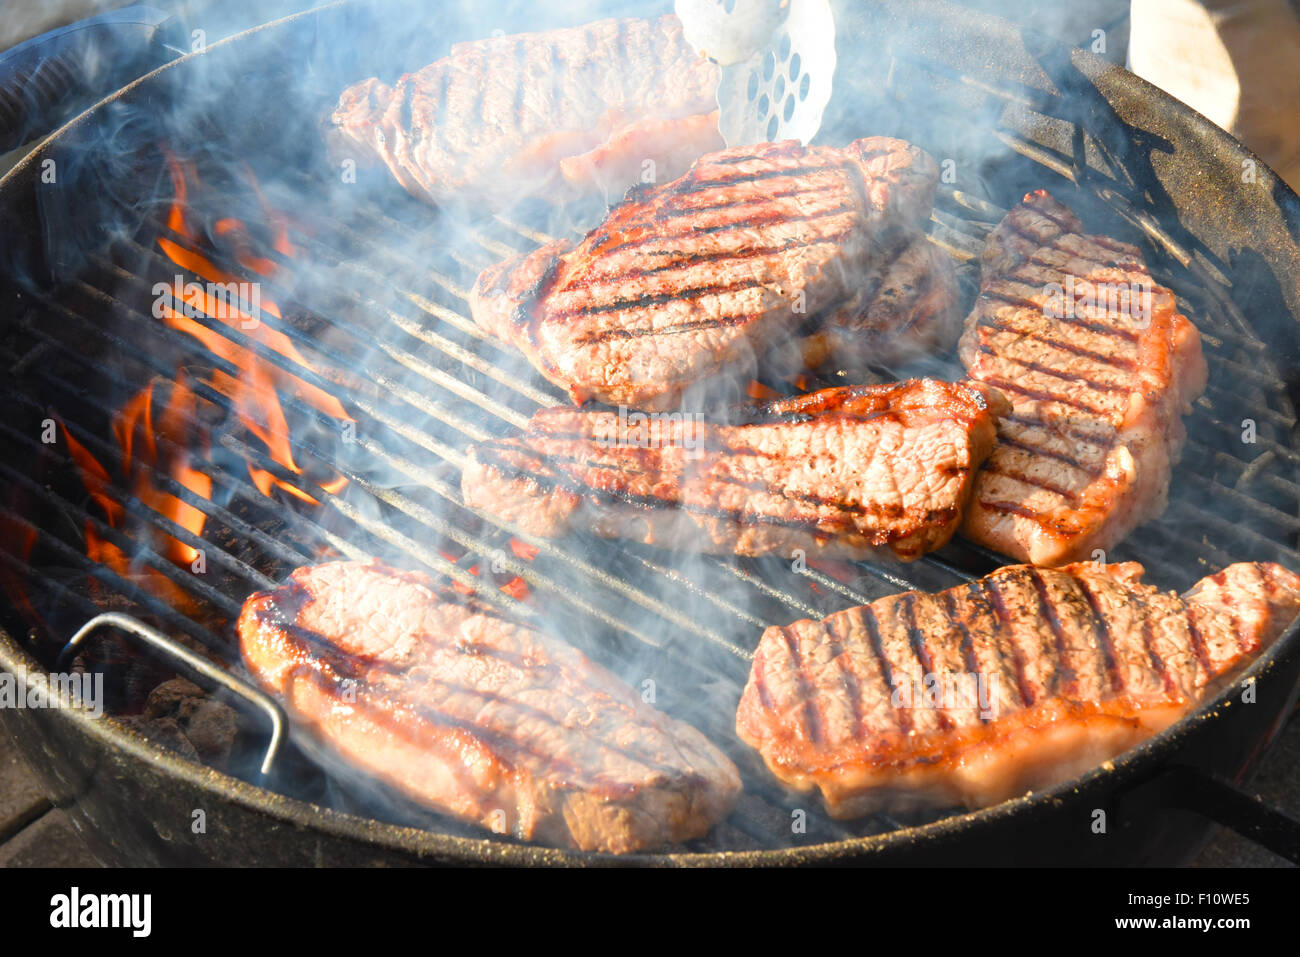 Juicy Entrecote steak on the grill Stock Photo - Alamy